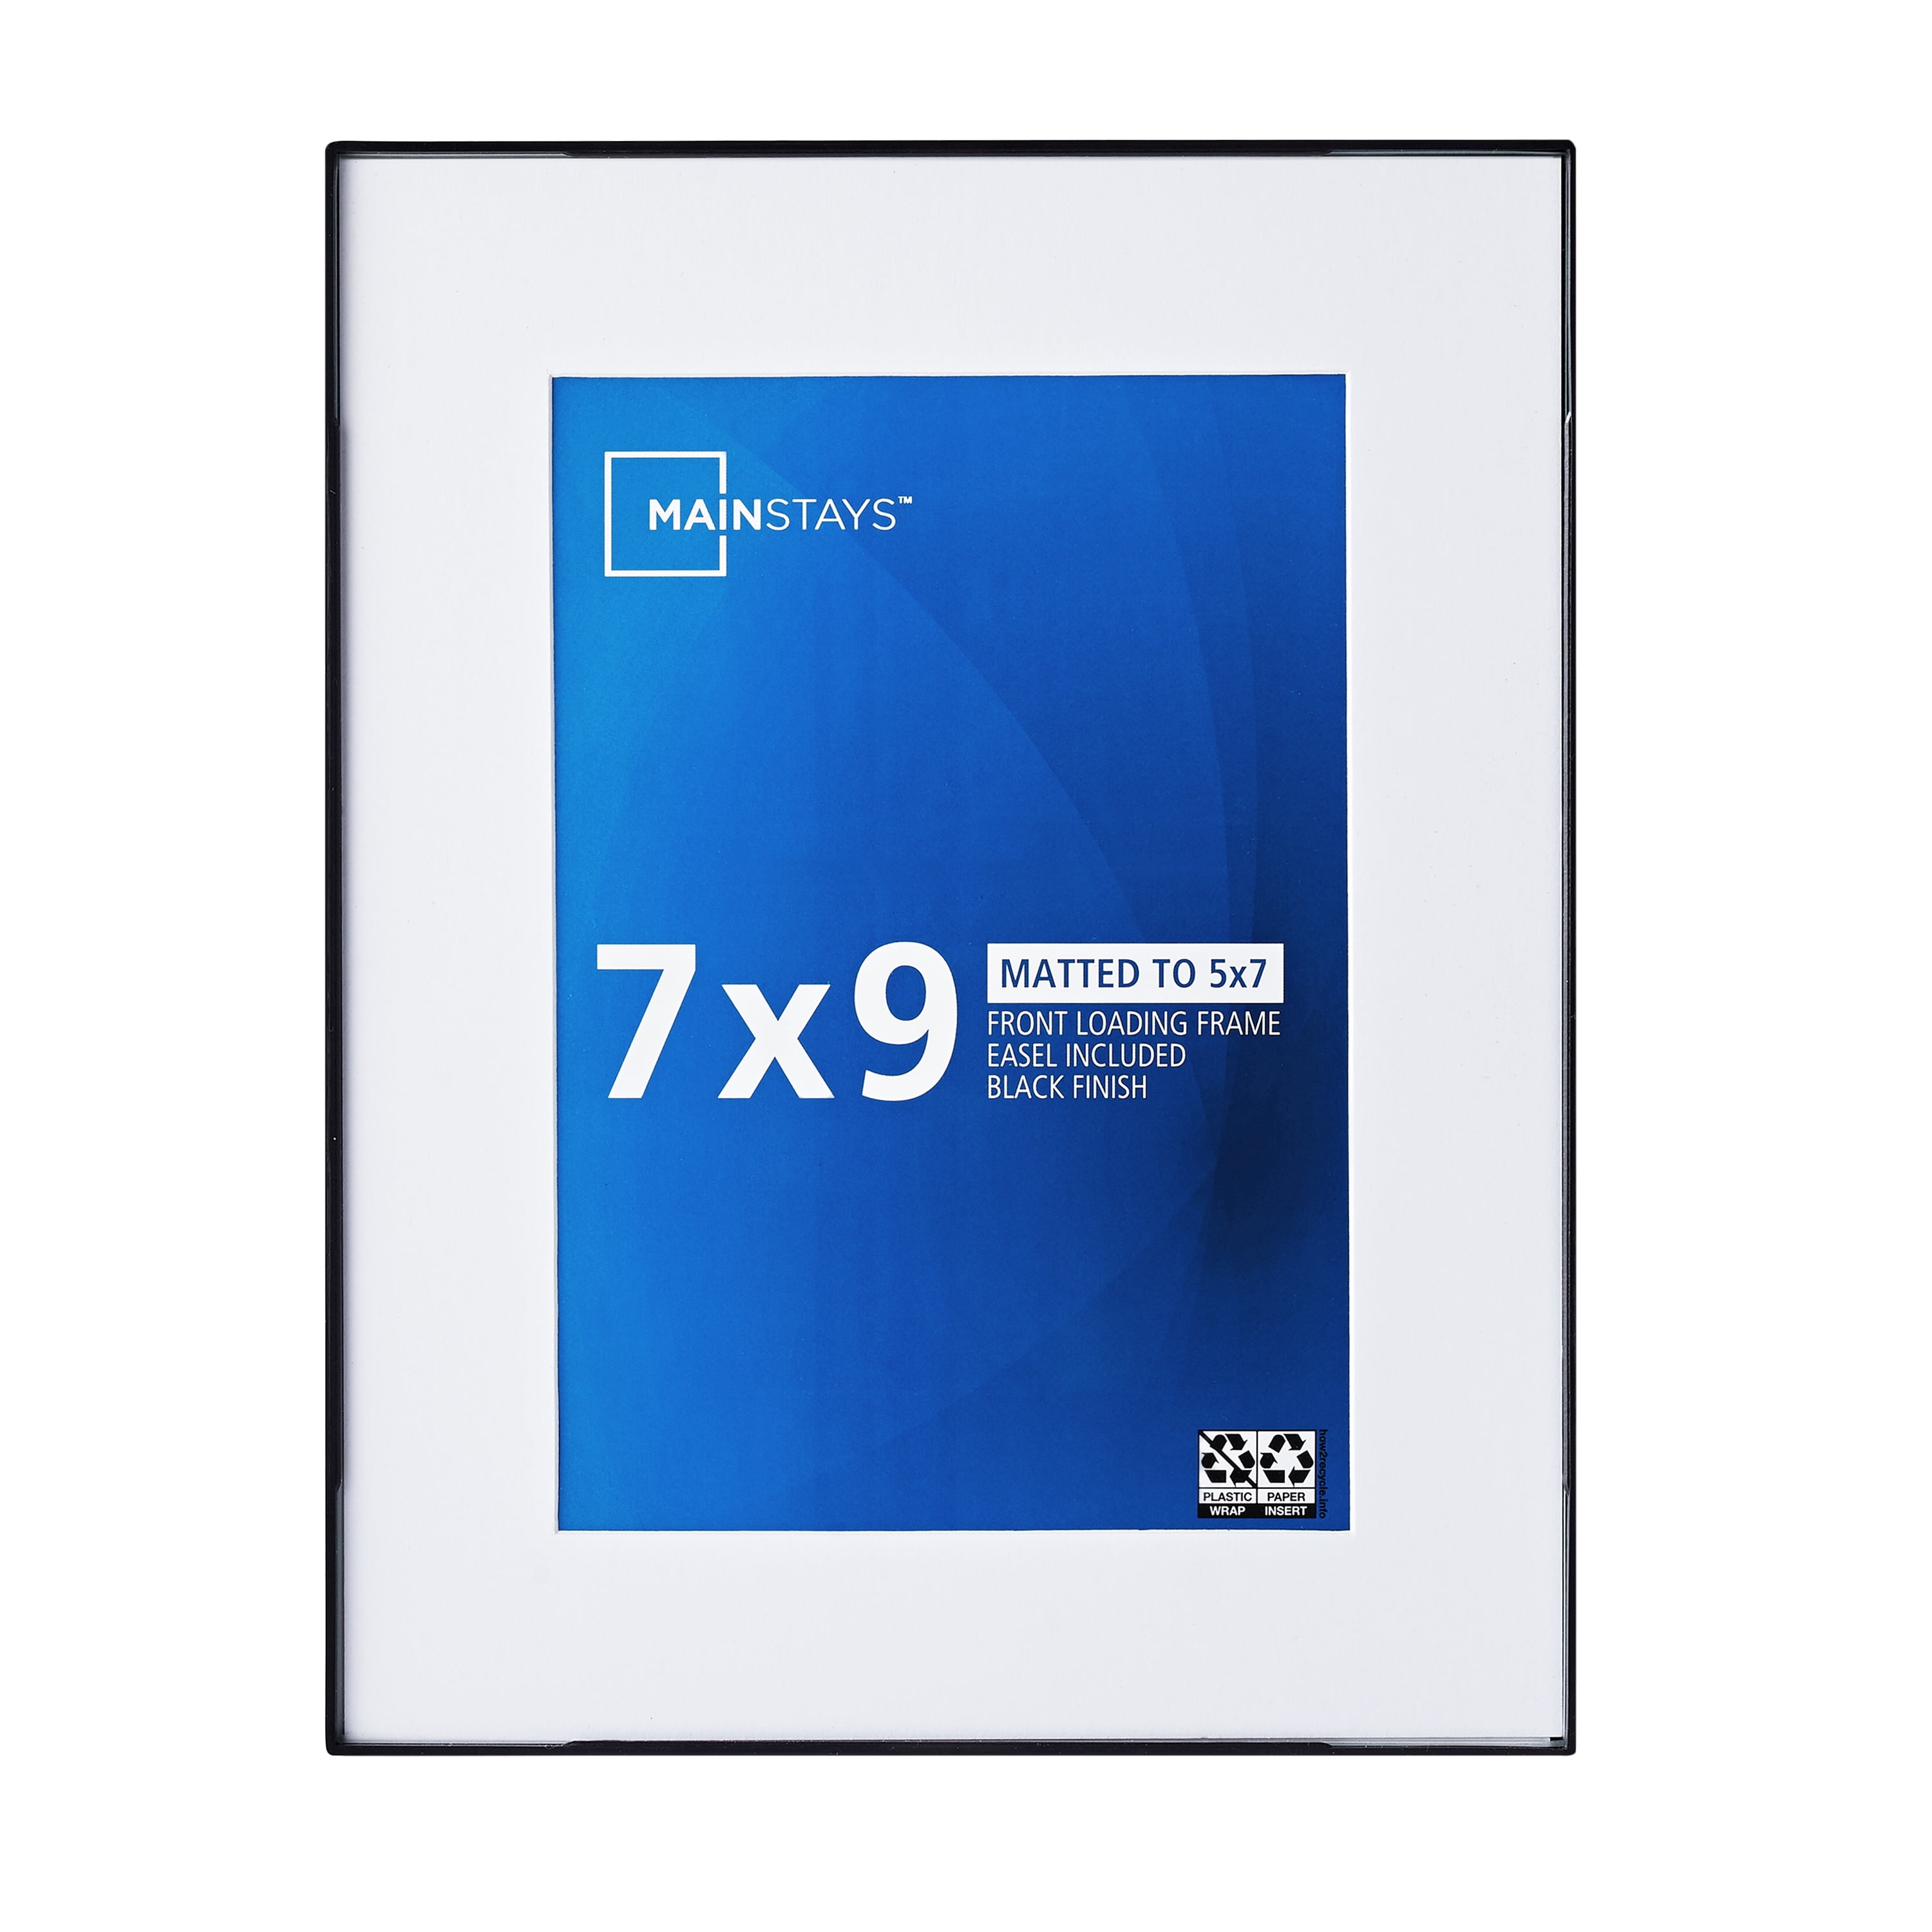 Mainstays 7x9 Matted to 5x7 Front Loading Picture Frames, Black